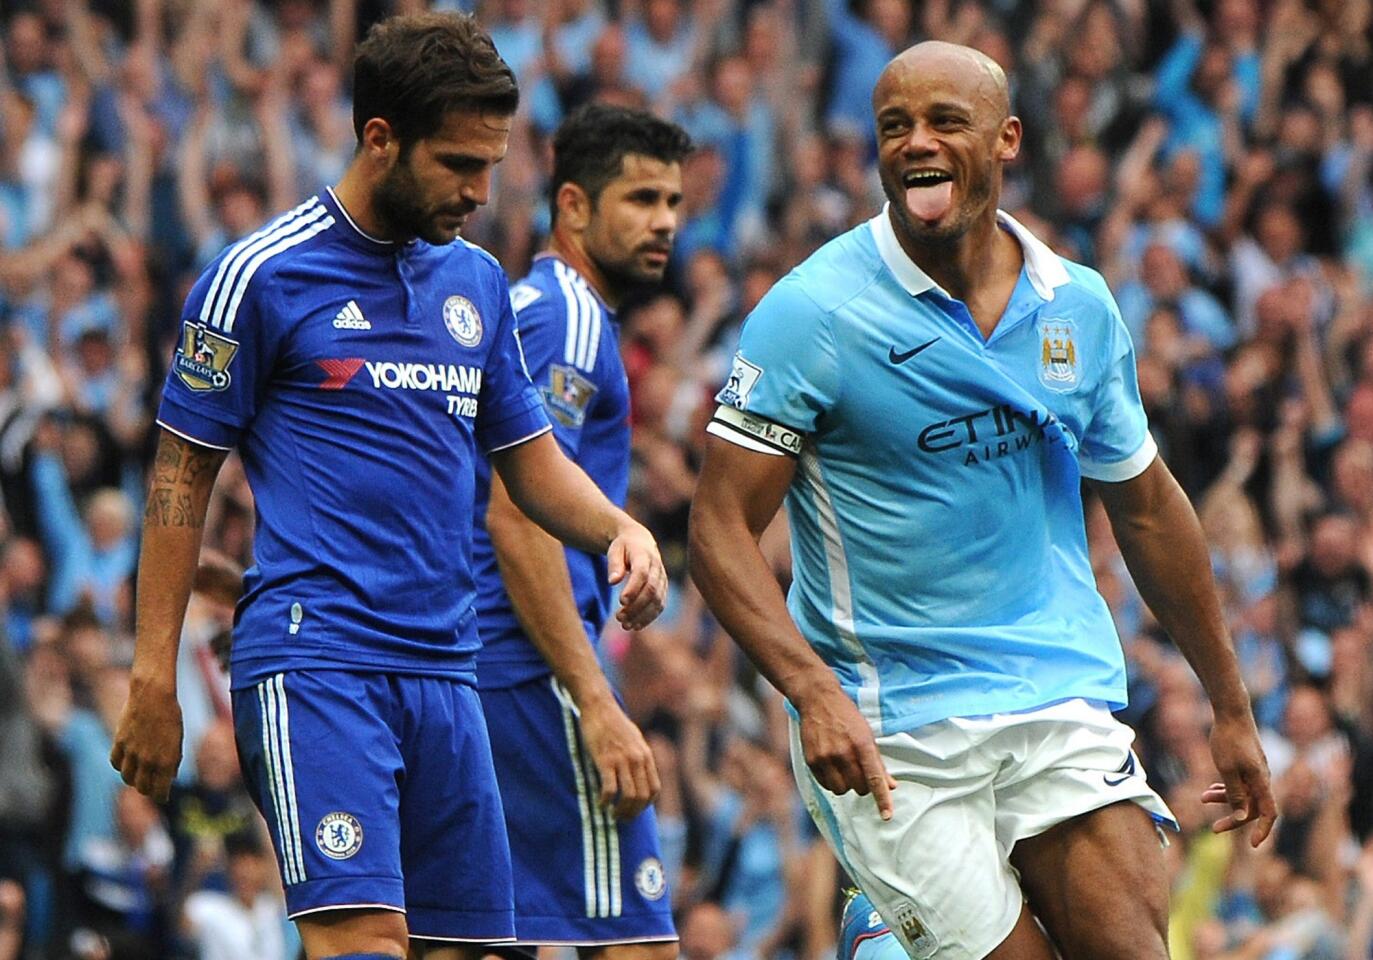 Manchester City's Vincent Kompany, right, celebrates after scoring against Chelsea during the English Premier League soccer match between Manchester City and Chelsea at Etihad stadium, Manchester, England, Sunday, Aug. 16, 2015. (AP Photo/Rui Vieira)